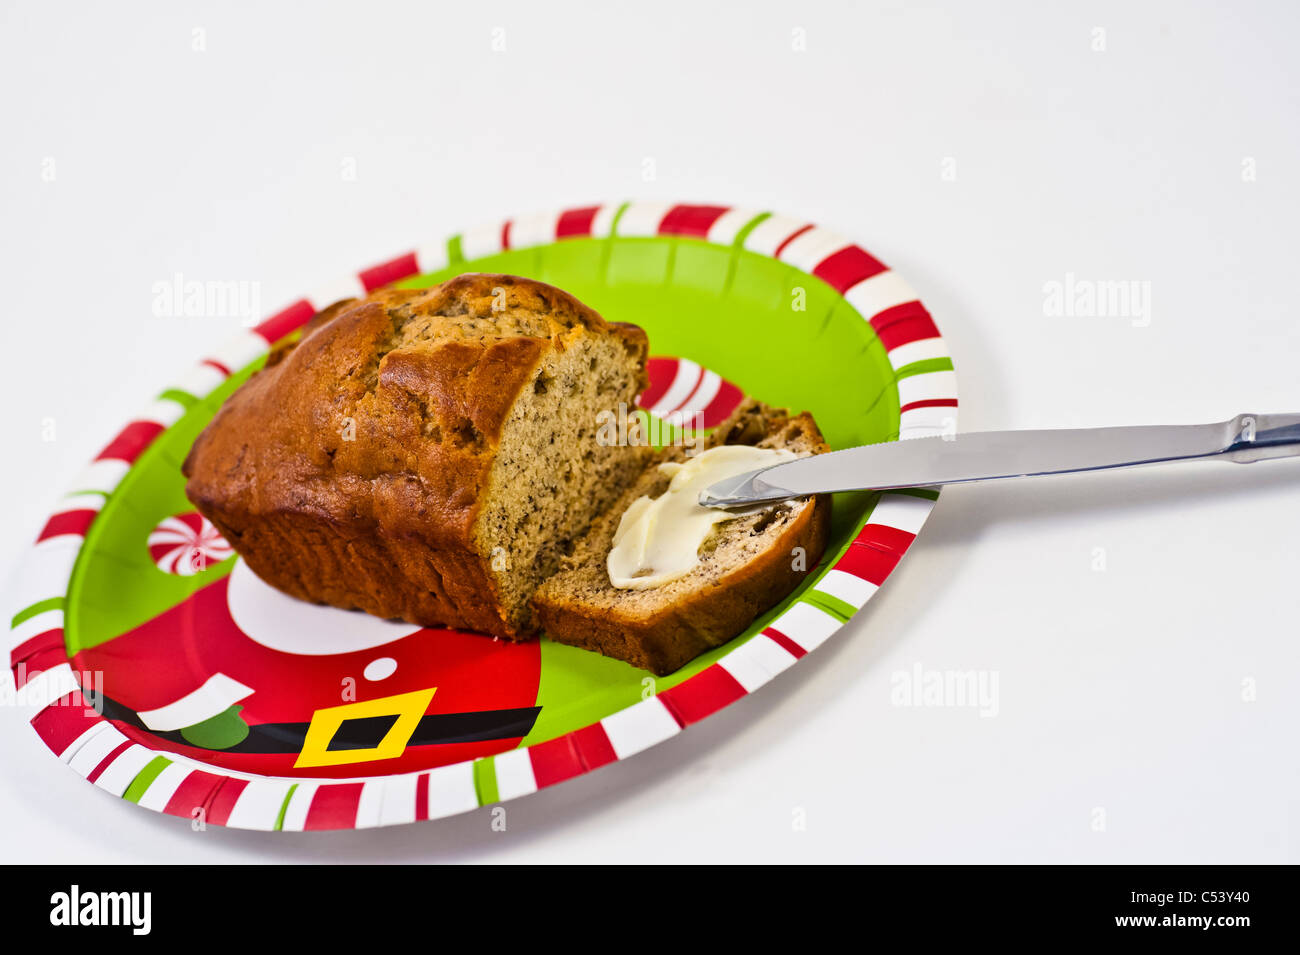 Loaf of Christmas banana bread cut and ready to eat. Stock Photo